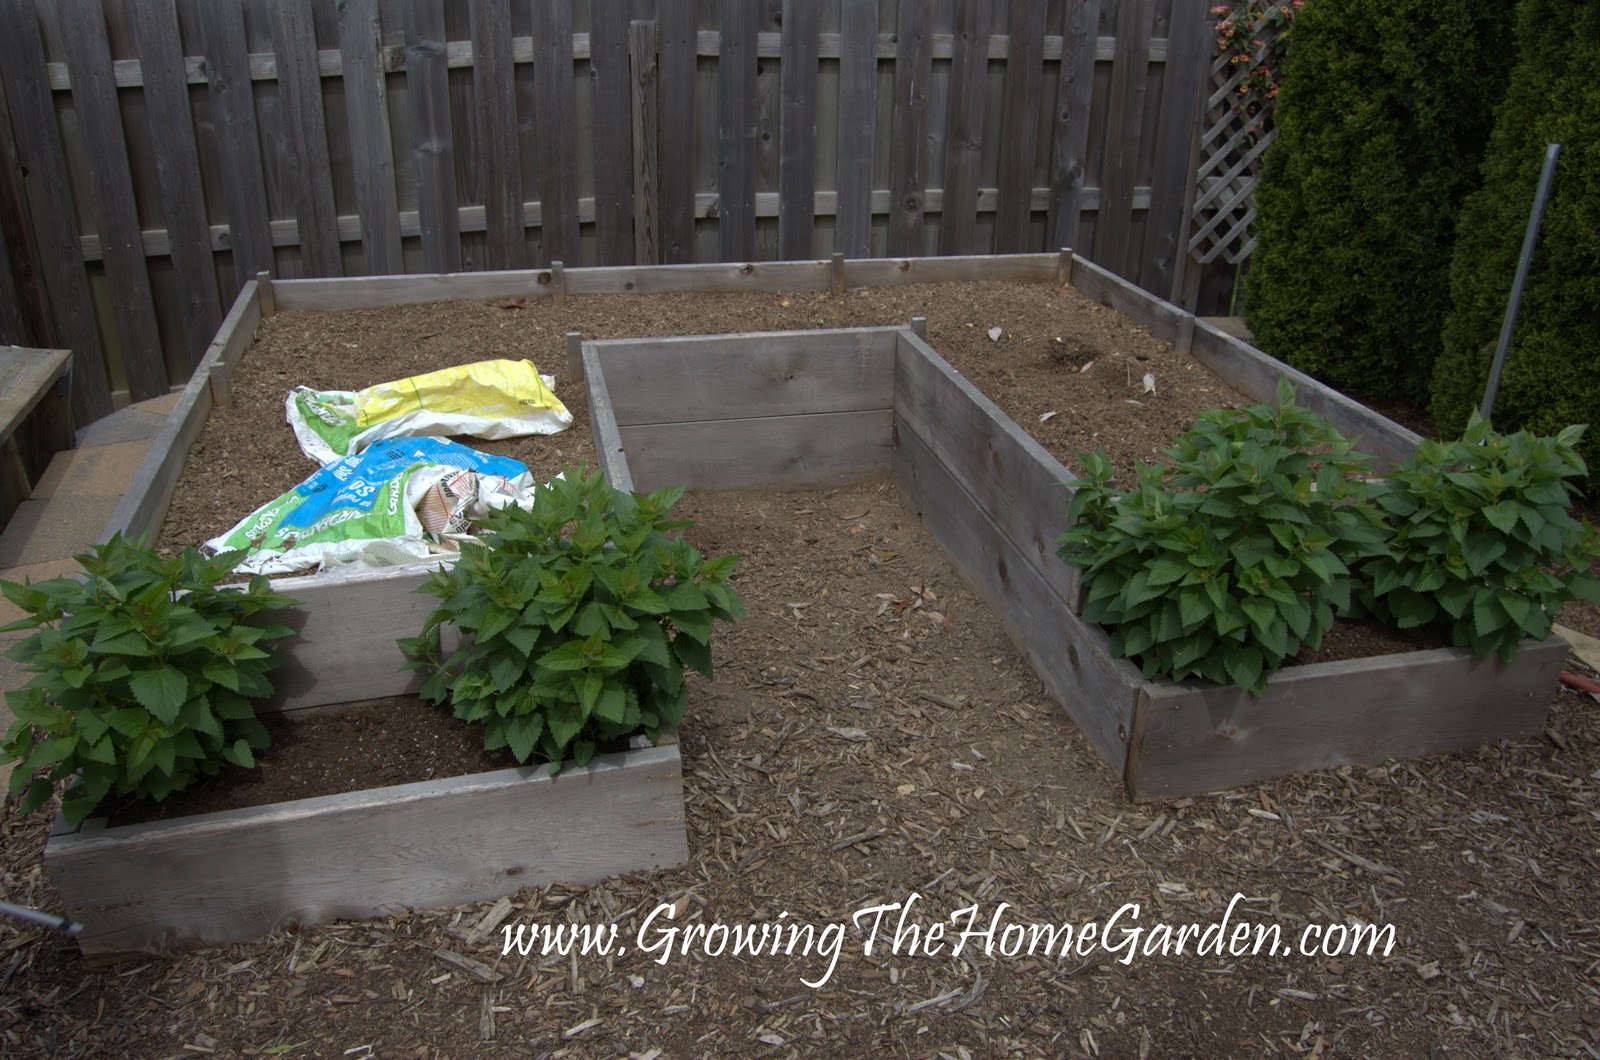 Garden Plans and Ideas: A 'U' Shaped Raised Bed Garden Layout